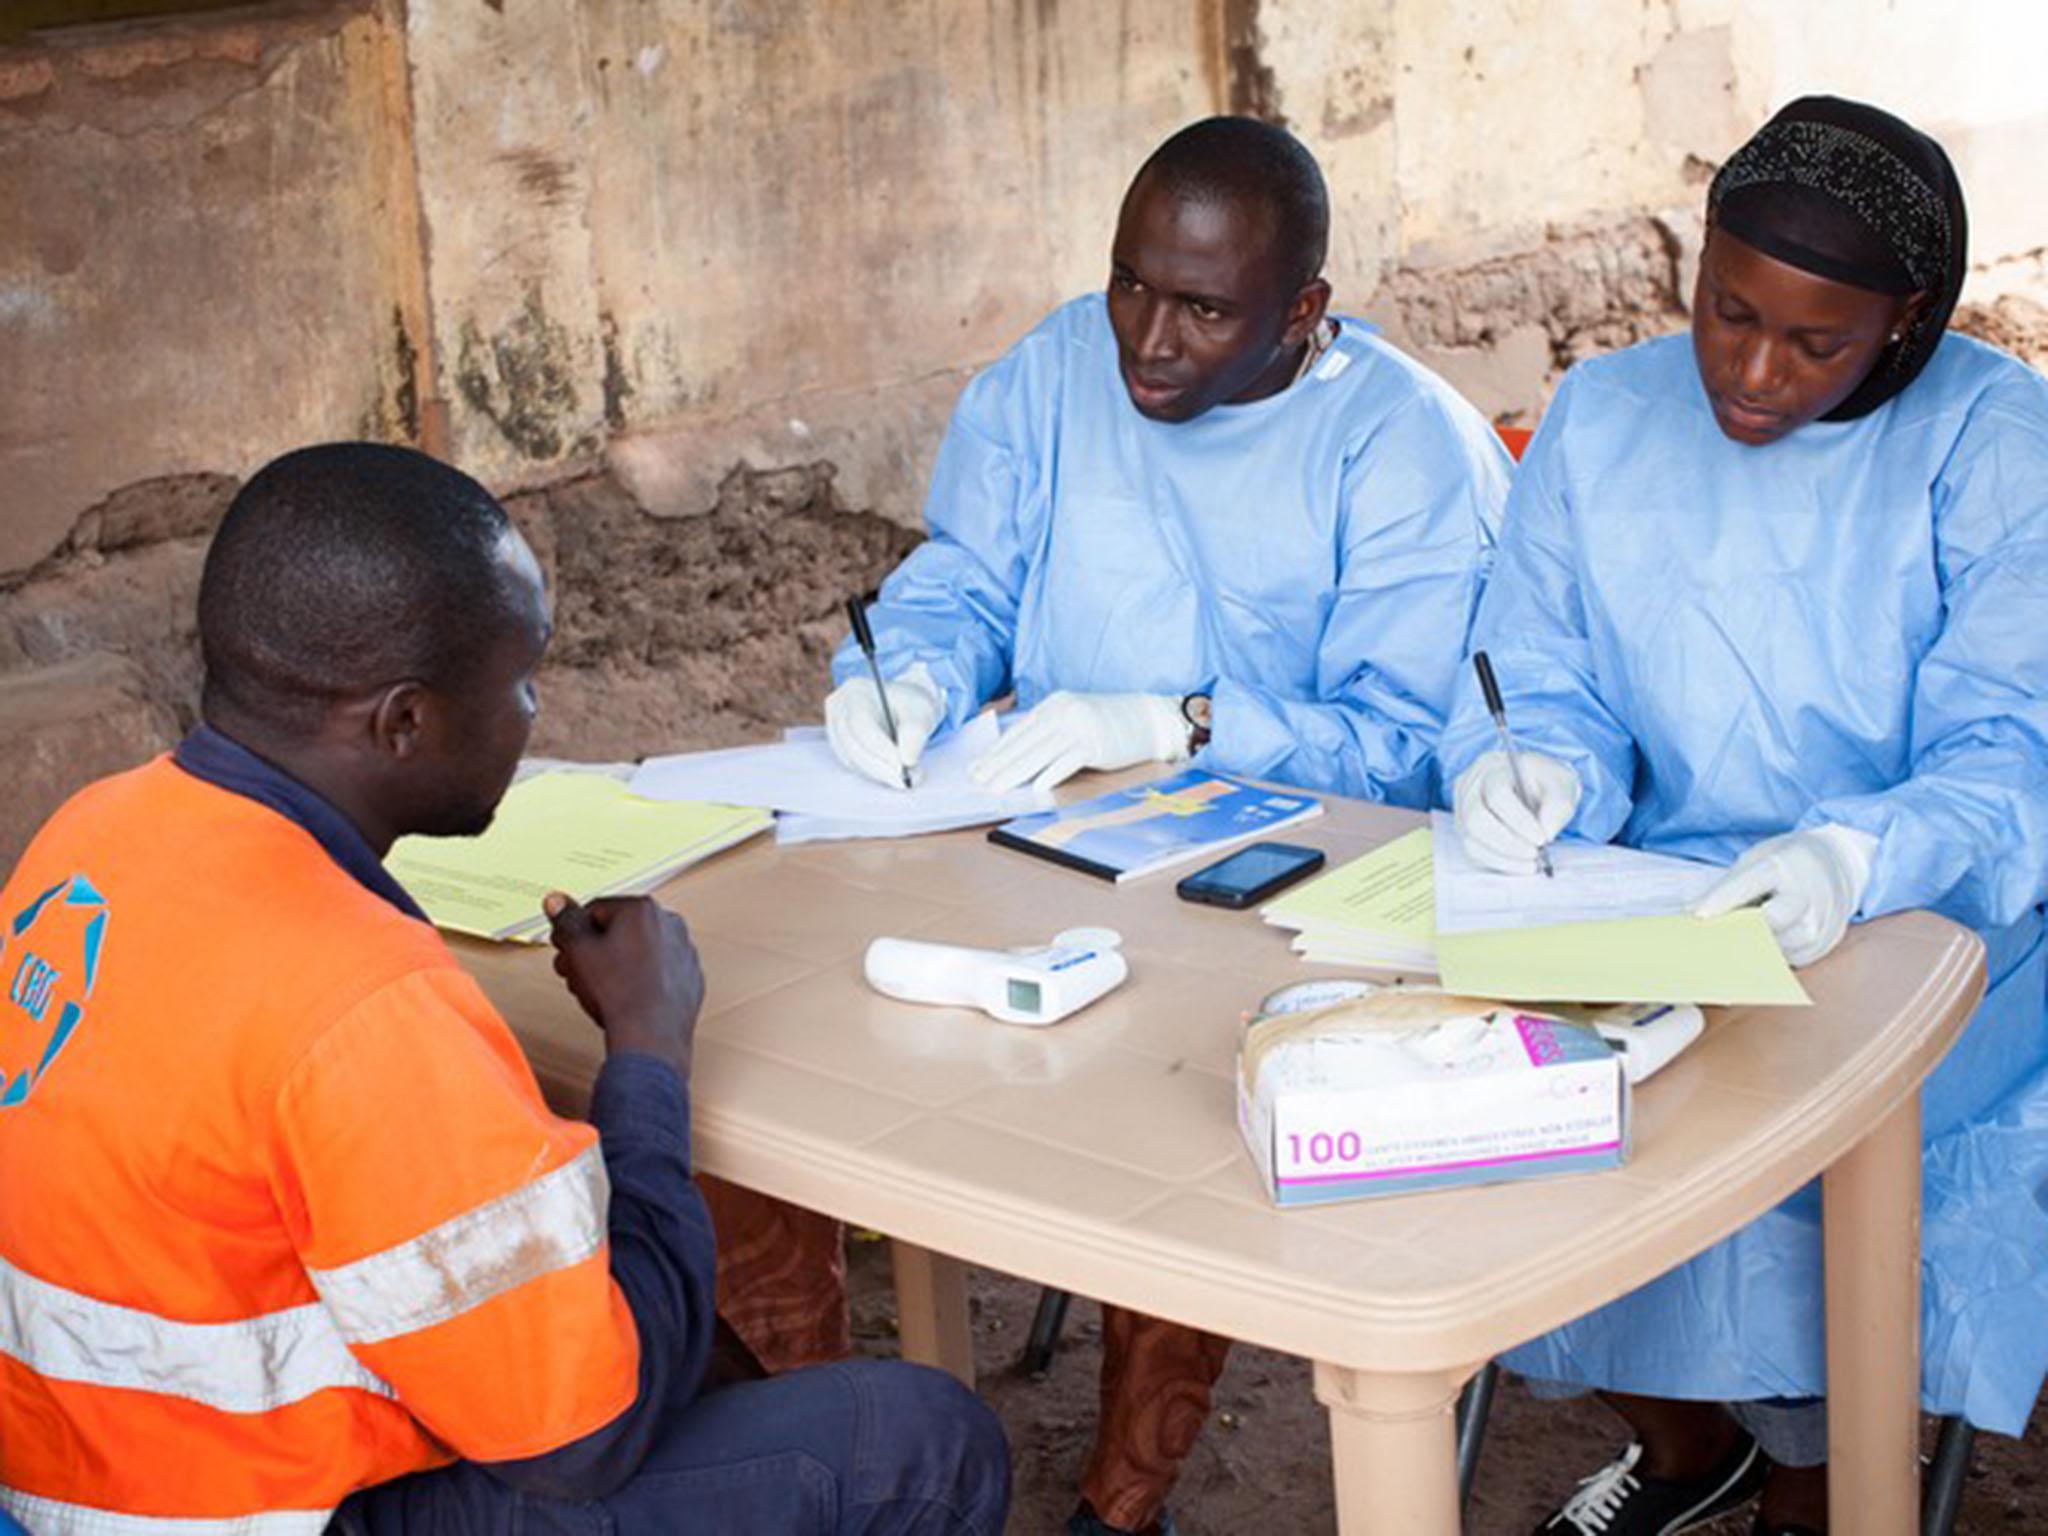 Health officials process samples in the Ebola lab at Donka Hospital in Conakry, Guinea